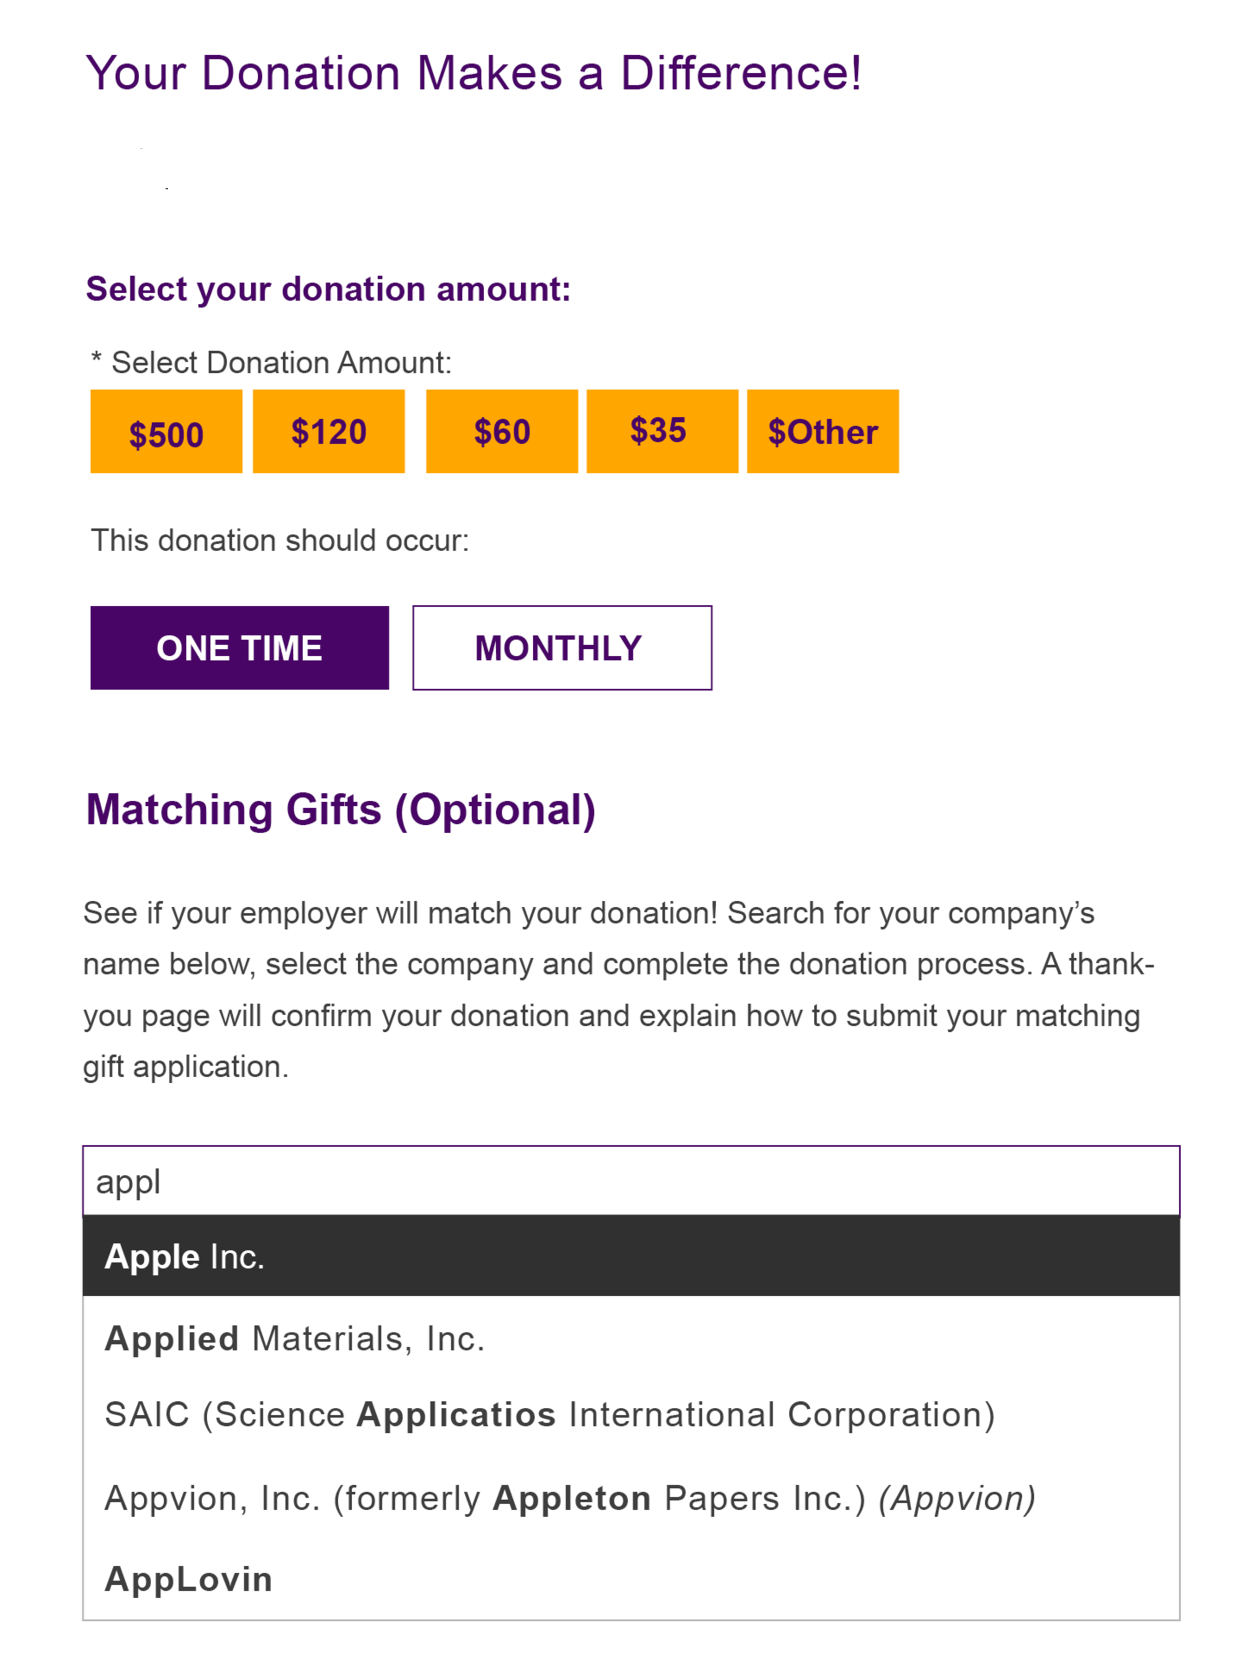 Example matching gift donation page from the Walk to End Alzheimer's